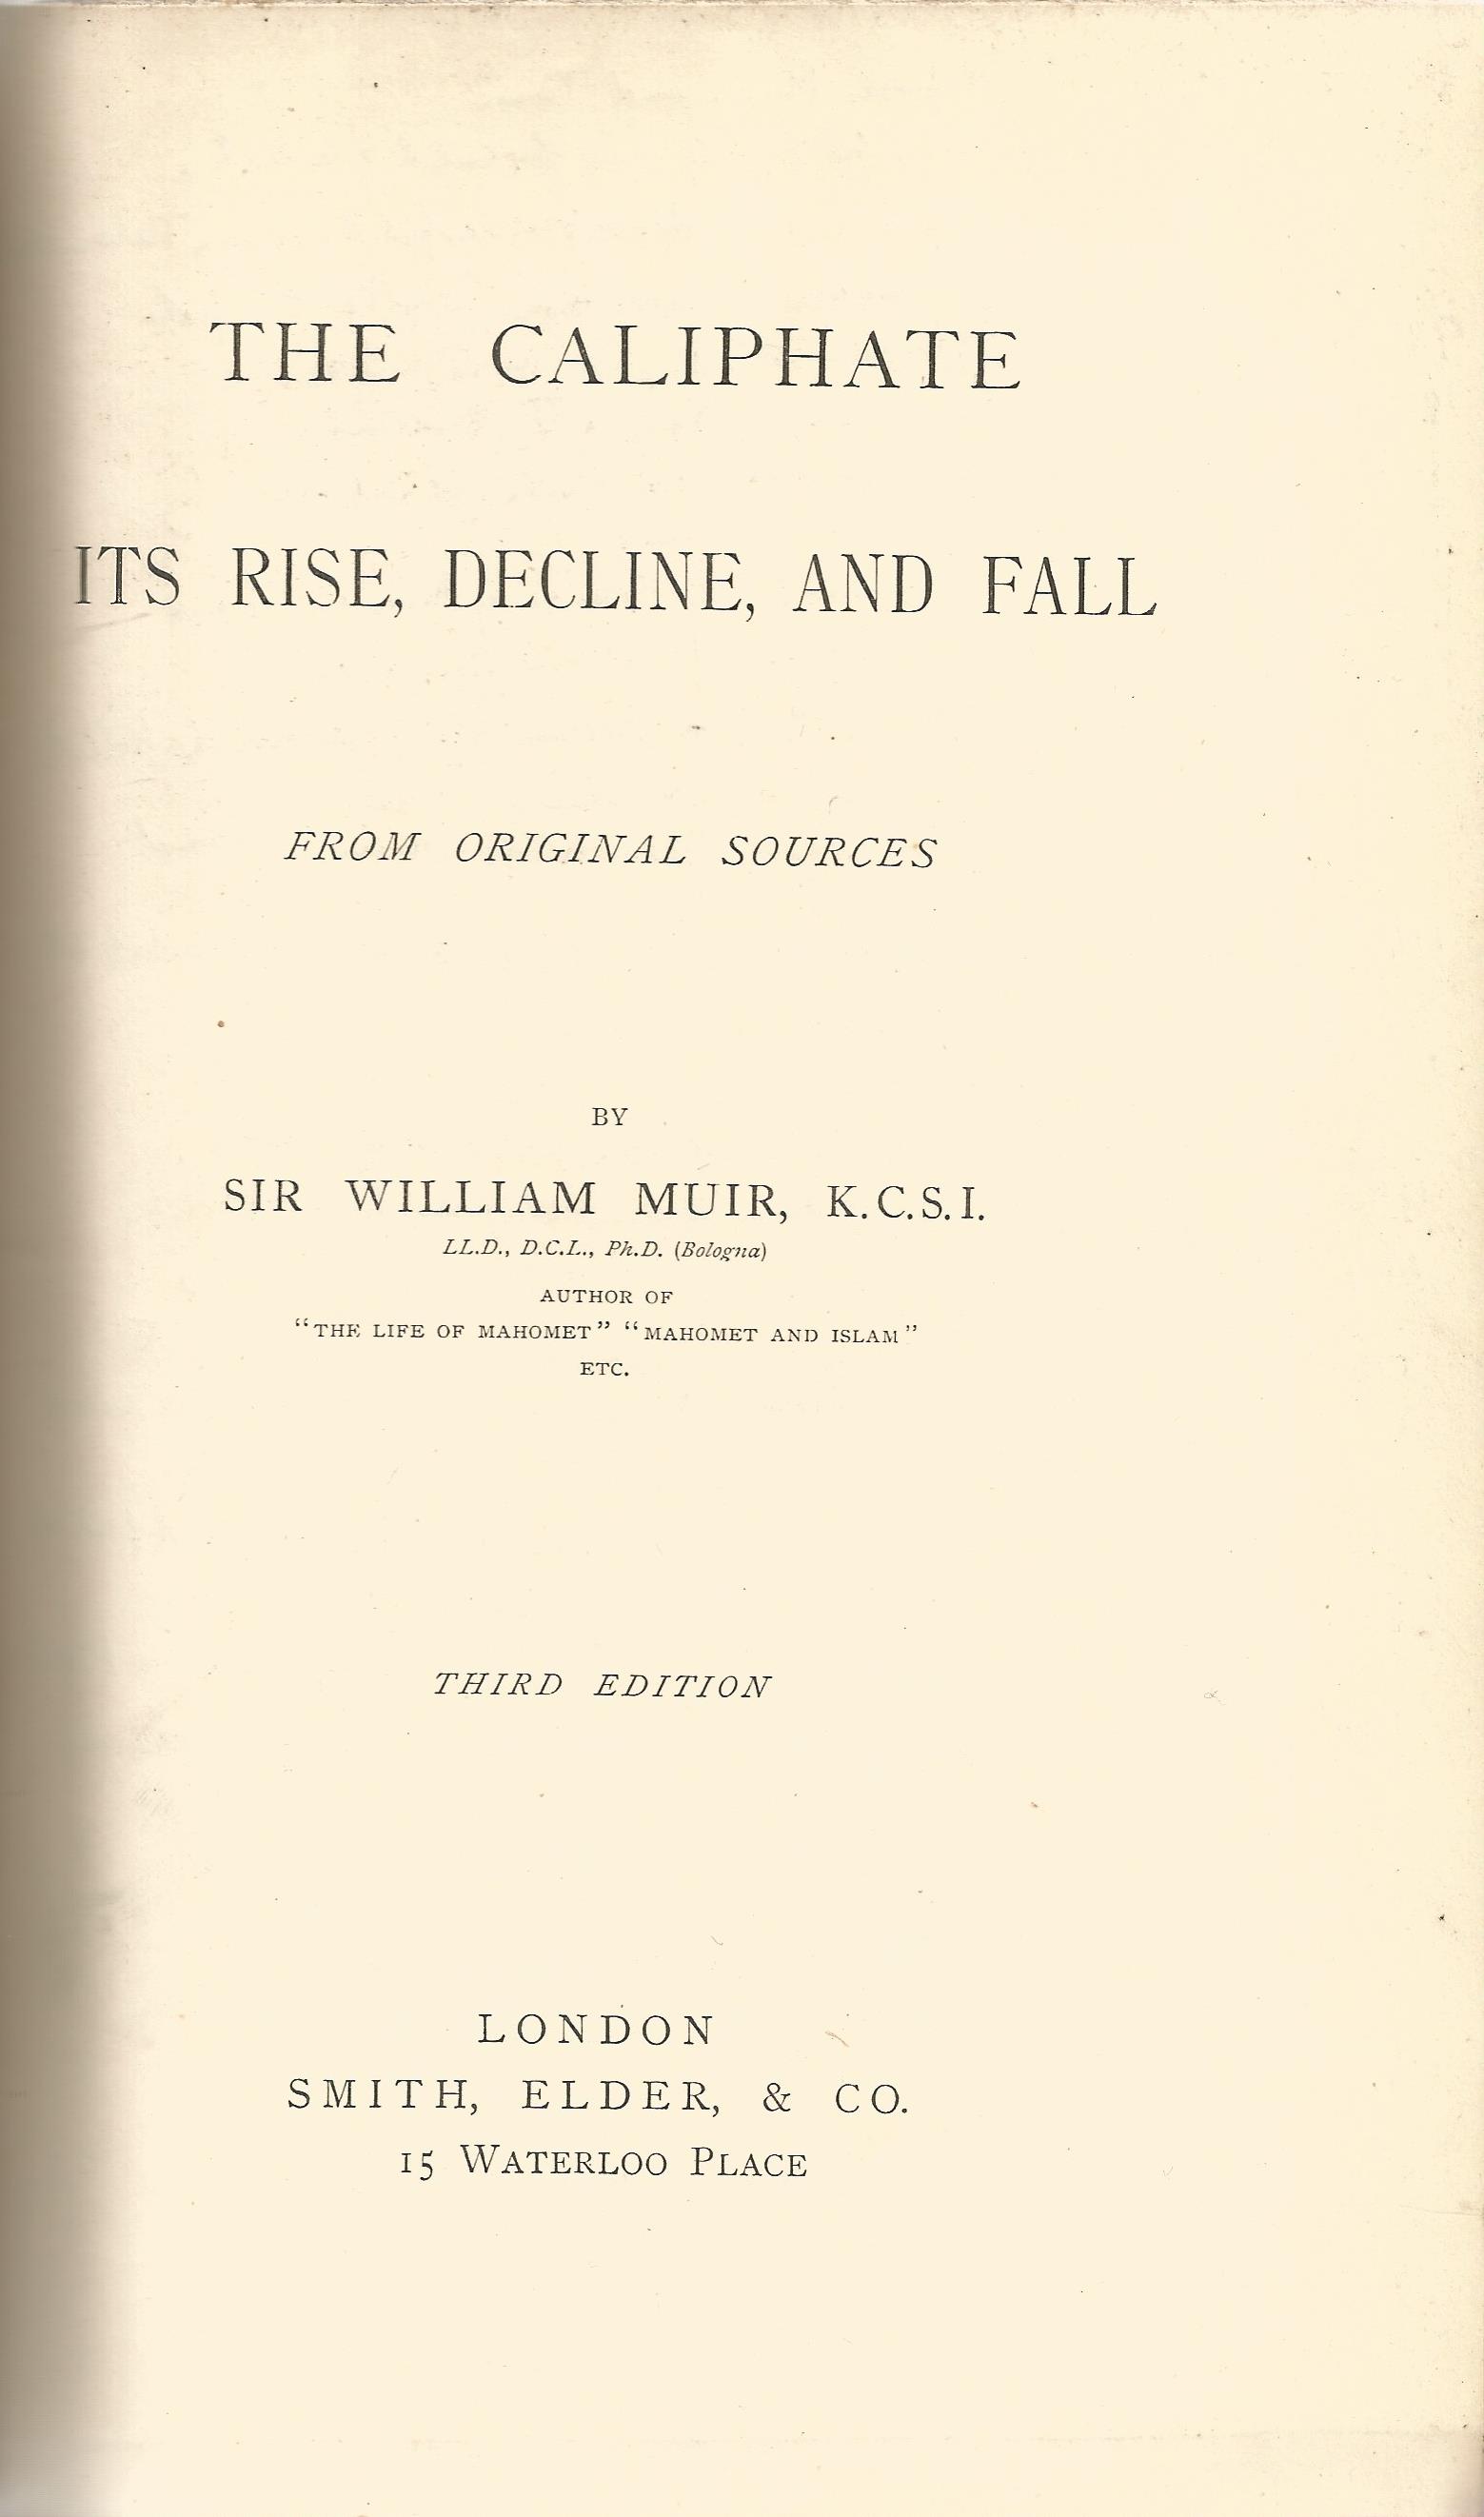 The Caliphate Its Rise, Decline, and Fall From Original Sources by Sir William Muir Third Edition - Image 2 of 2